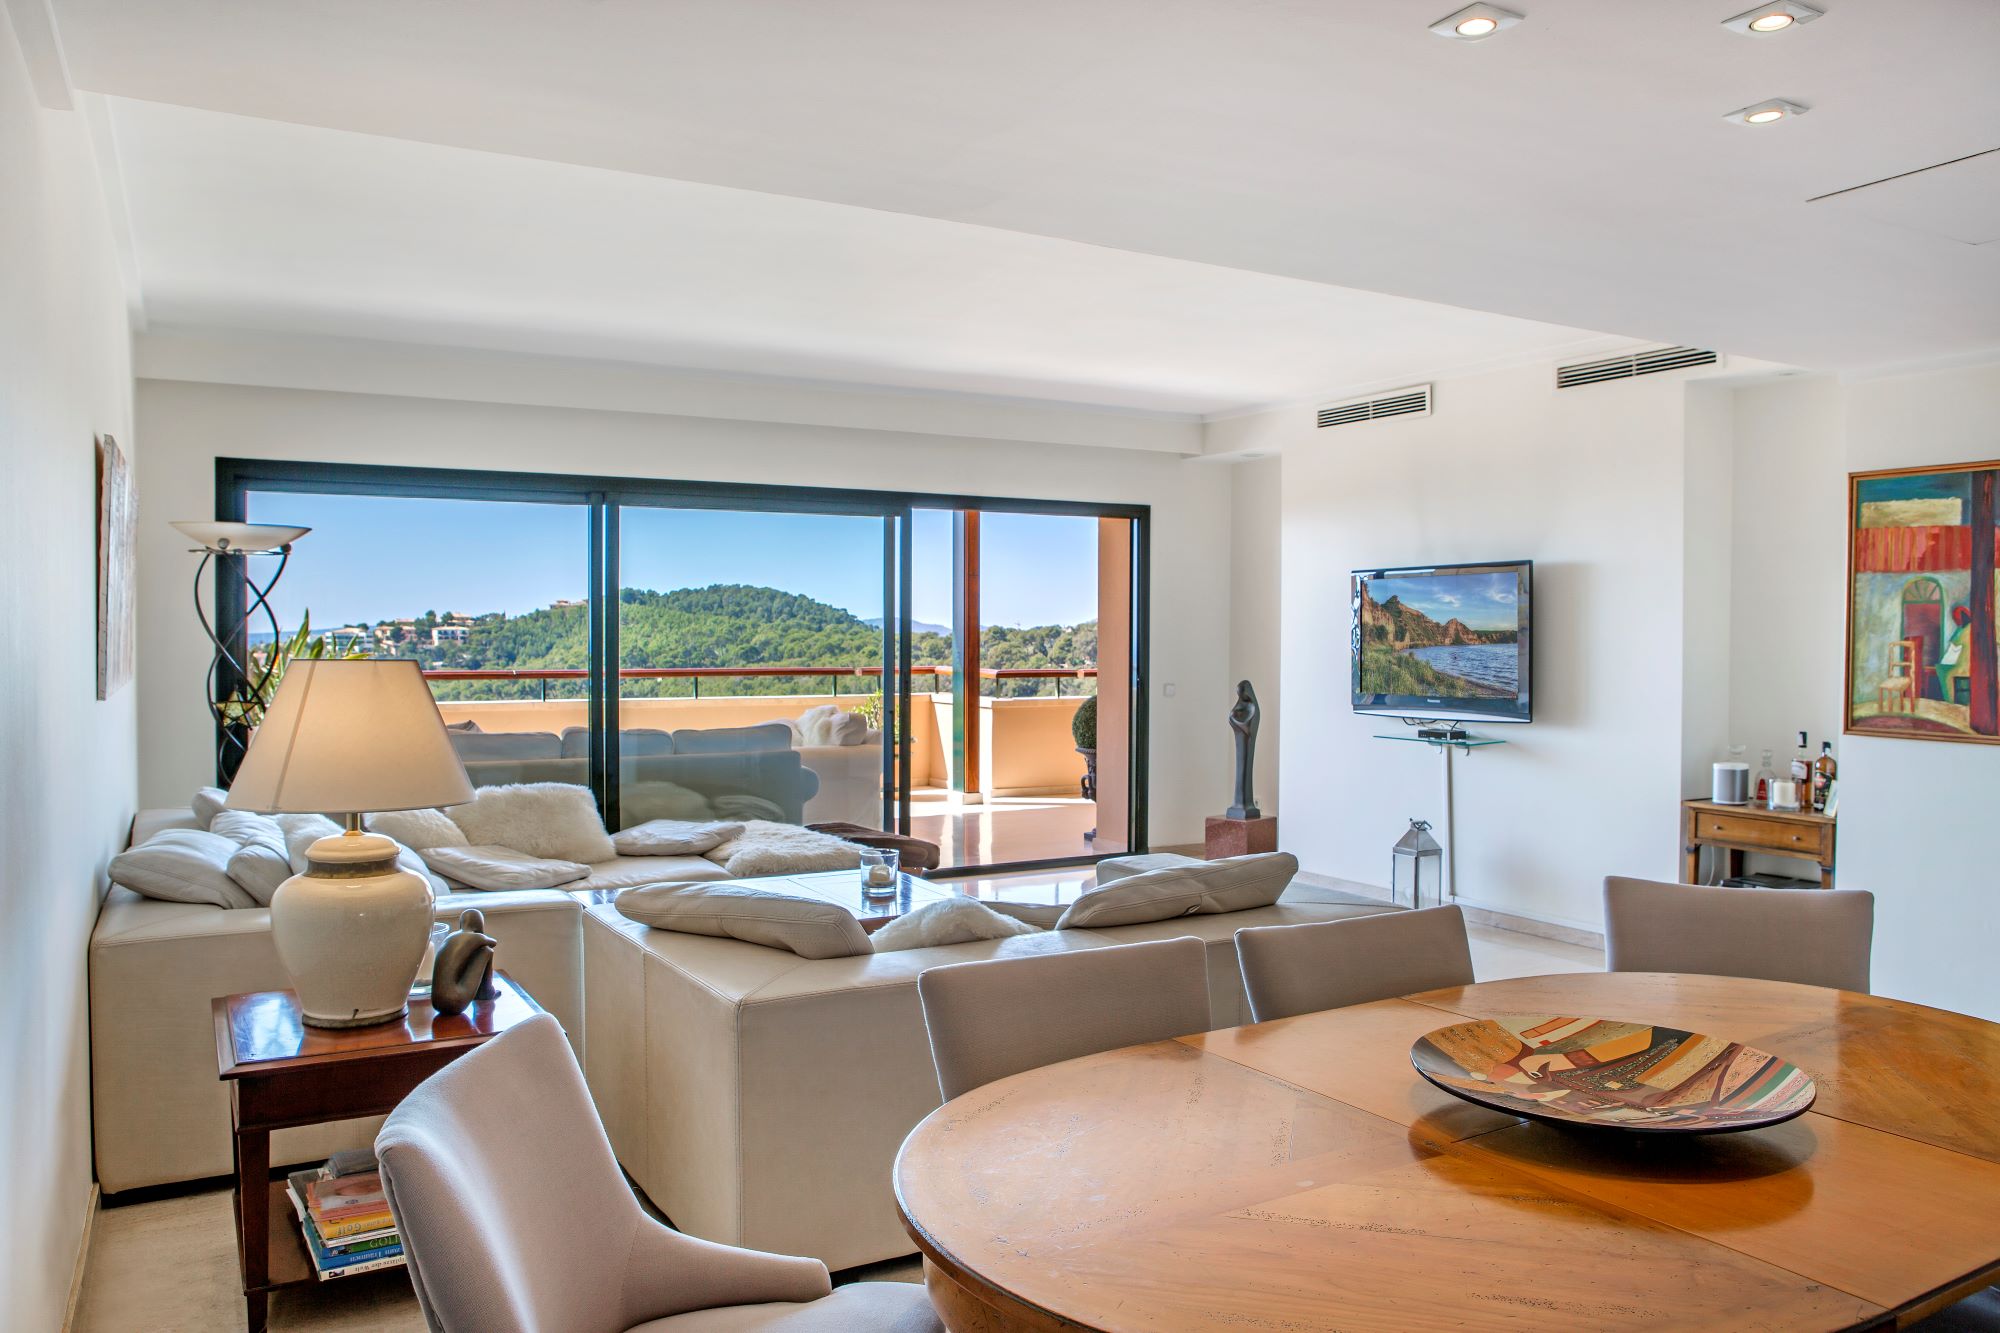 Luxurious and spacious penthouse duplex in Olinto